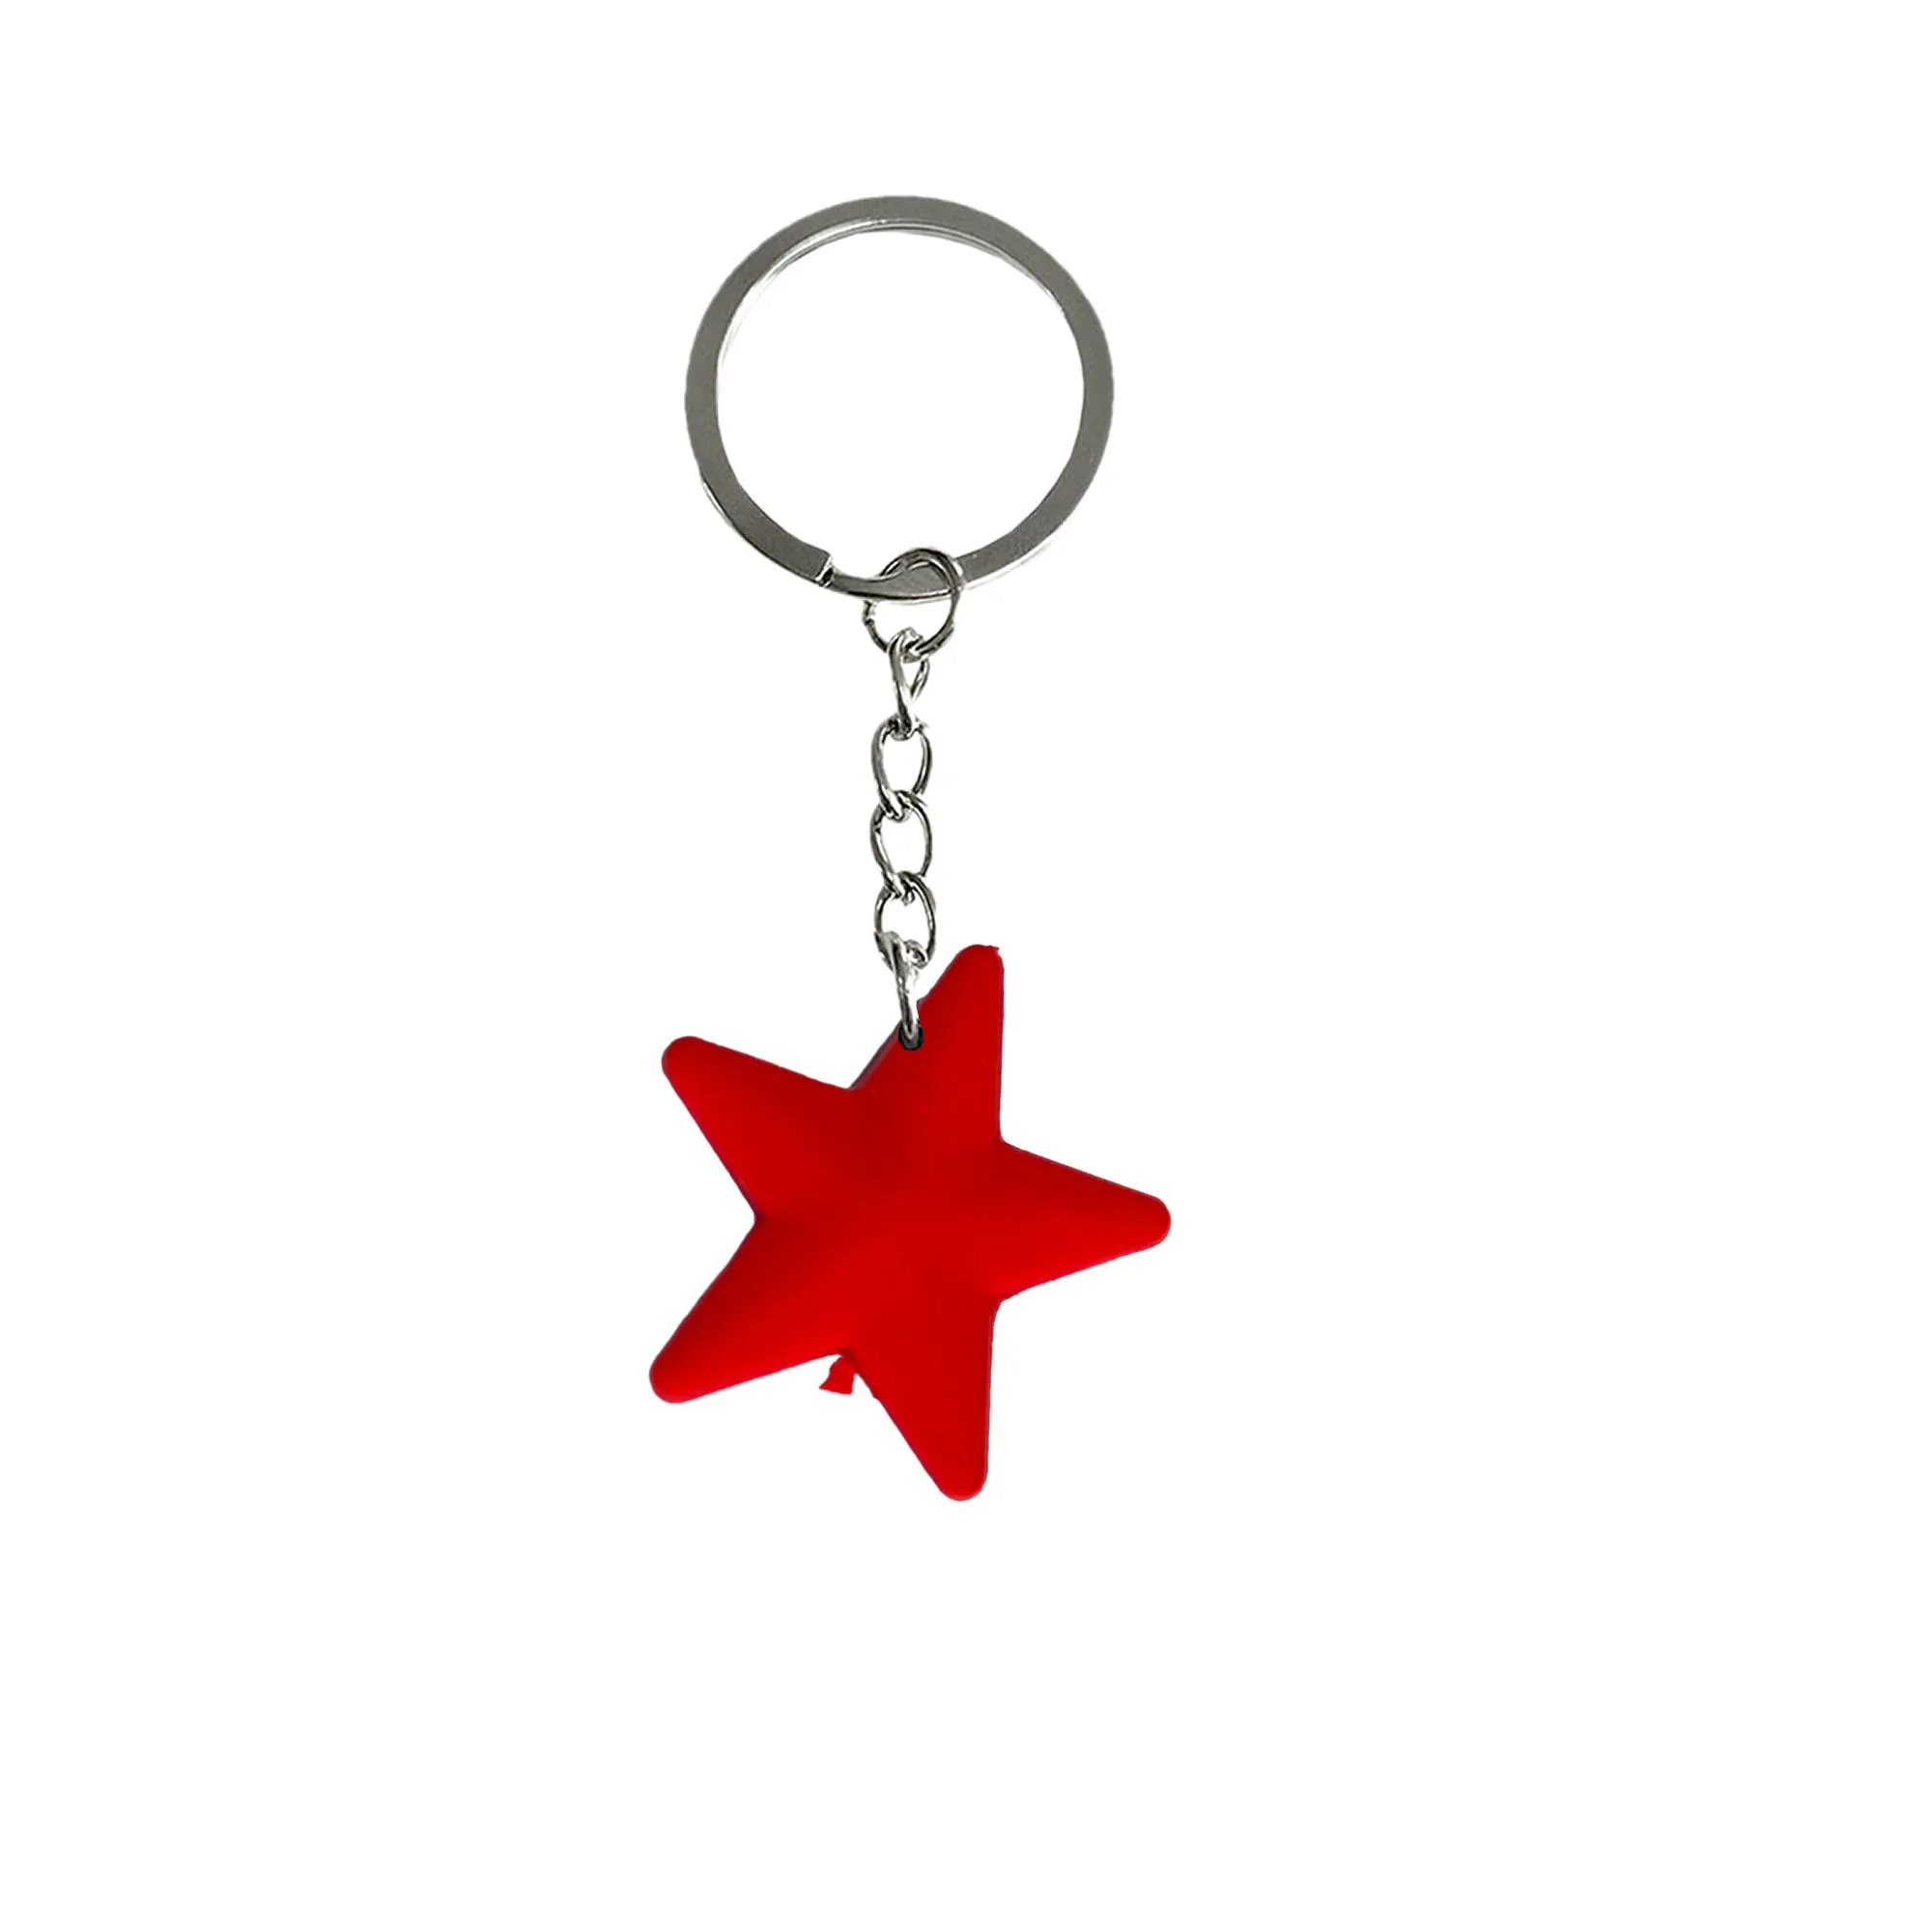 star keychain for goodie bag stuffers supplies keychains party favors keyring backpacks suitable schoolbag tags stuffer christmas gifts school bags backpack